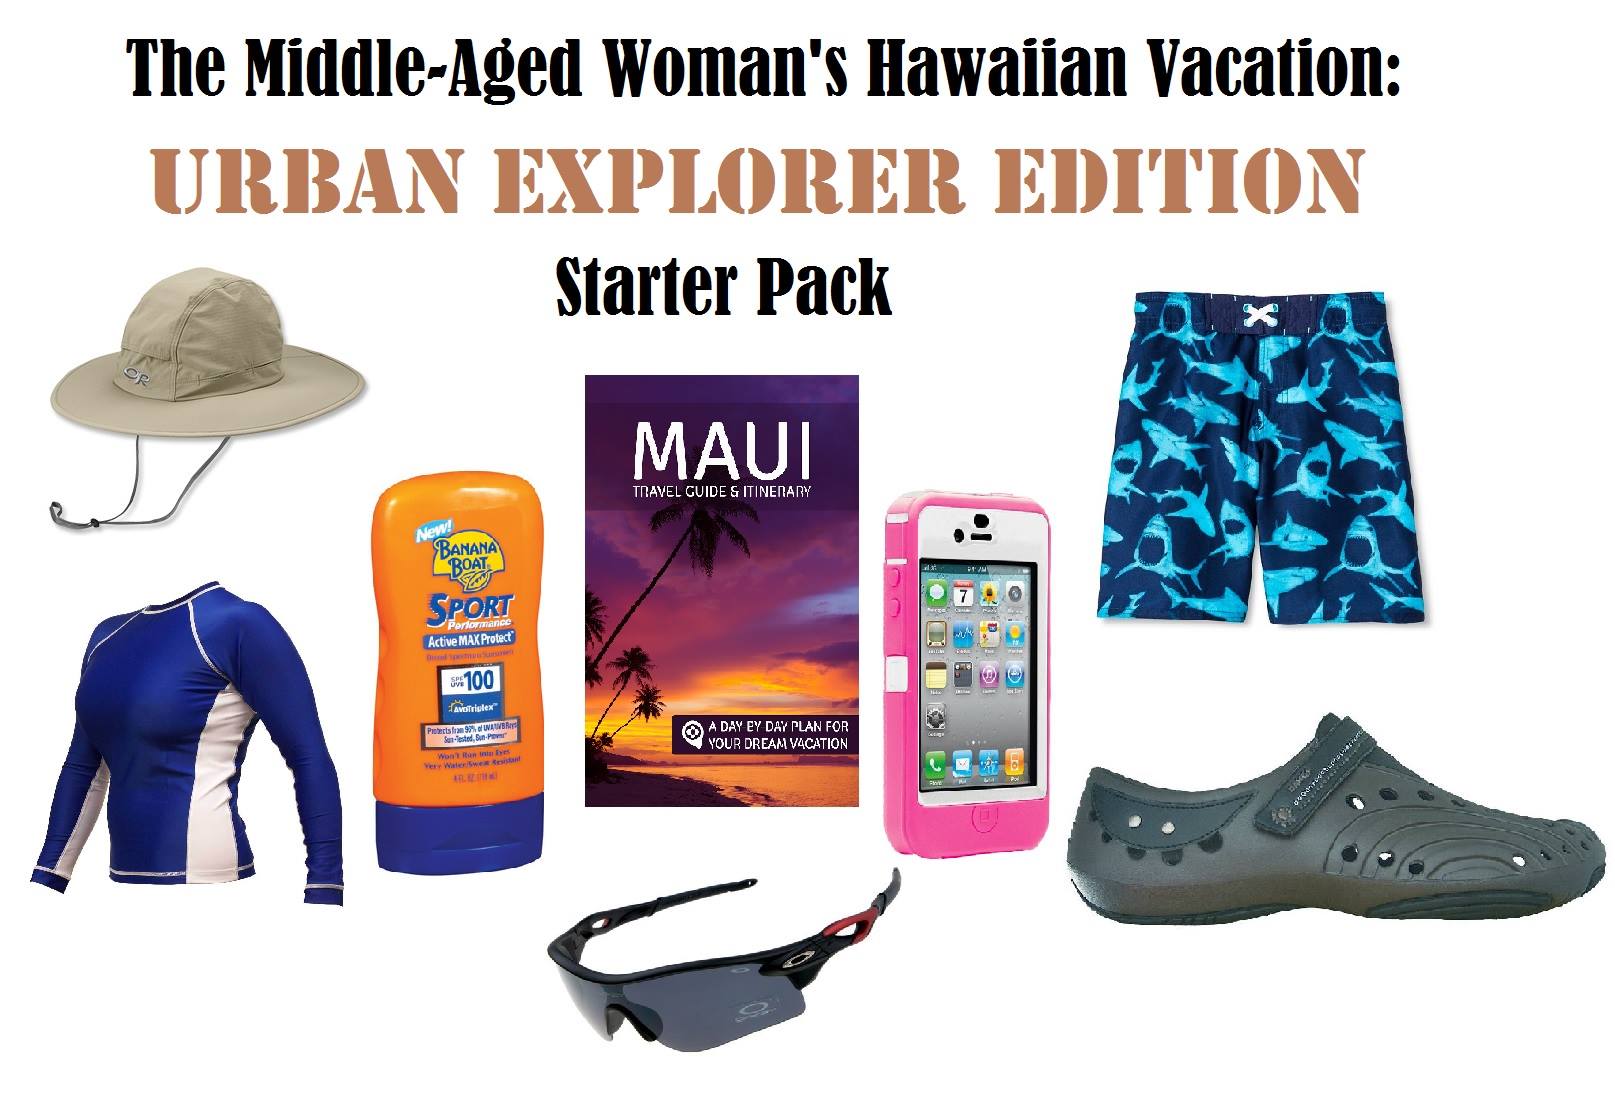 explorer starter pack - The MiddleAged Woman's Hawaiian Vacation Urban Explorer Edition Starter Pack Or Maui Travel Guide & Itinerary New! Banana Boat Sport Perhormance Active Max Protect v 100 AvoTriplex Probes 97 B Surested, SunPovar" A Day By Day Plan 